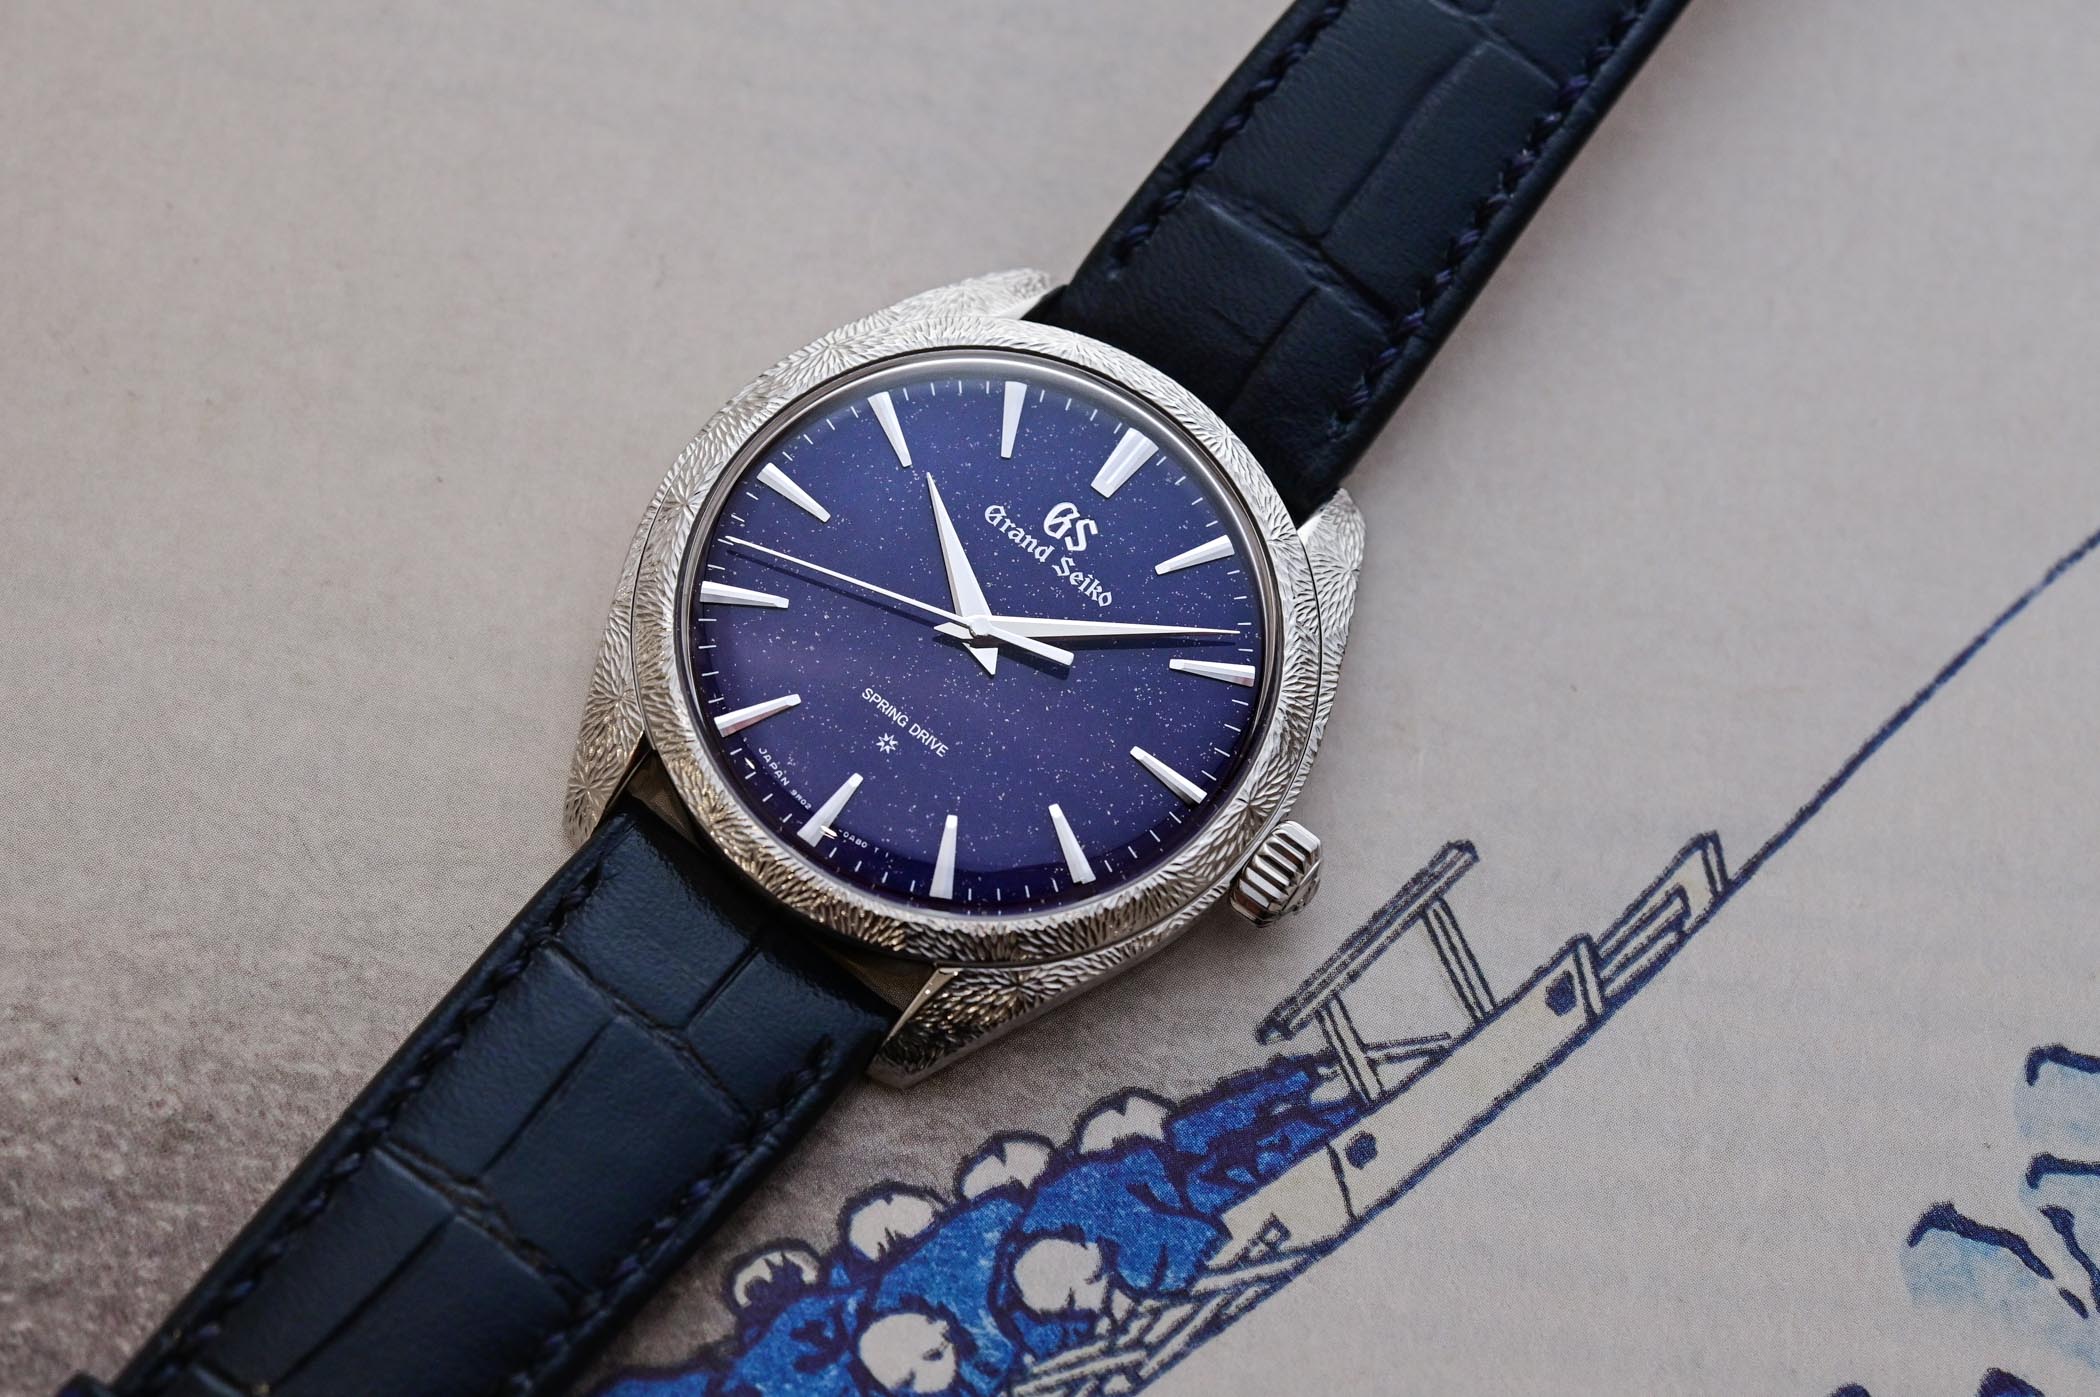 Grand Seiko Masterpiece Spring Drive SBGZ007 - Hands-On Review